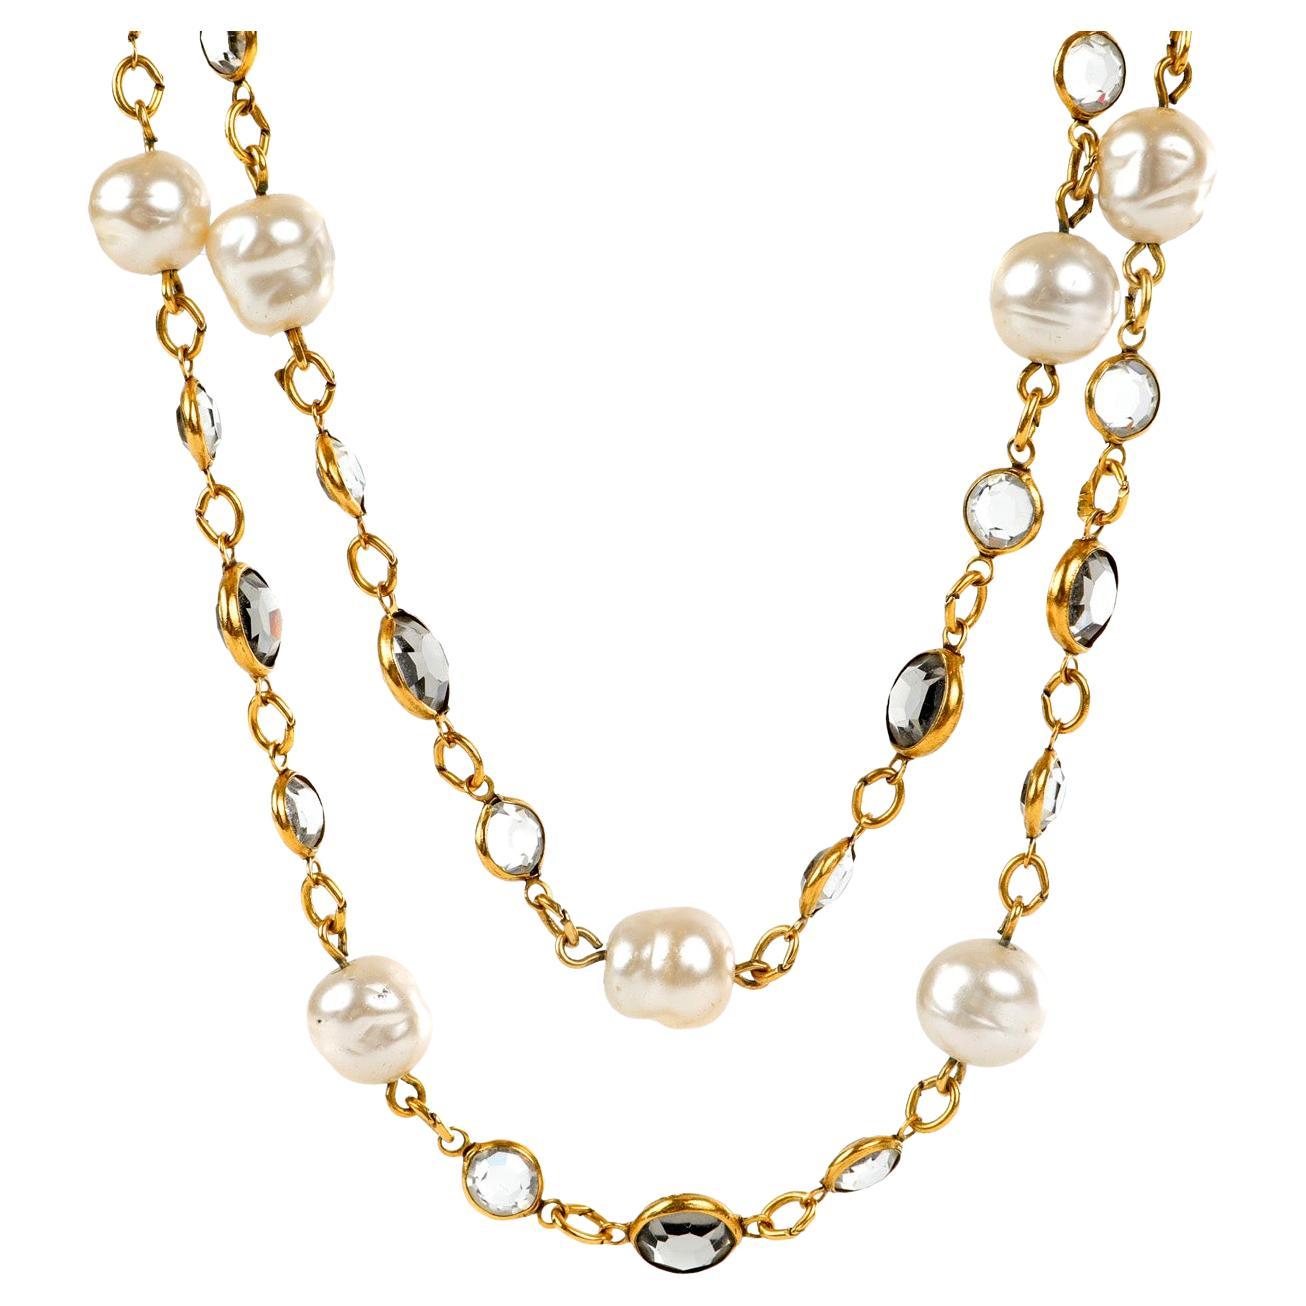 Chanel Vintage Pearl and Crystal Opera Length Necklace